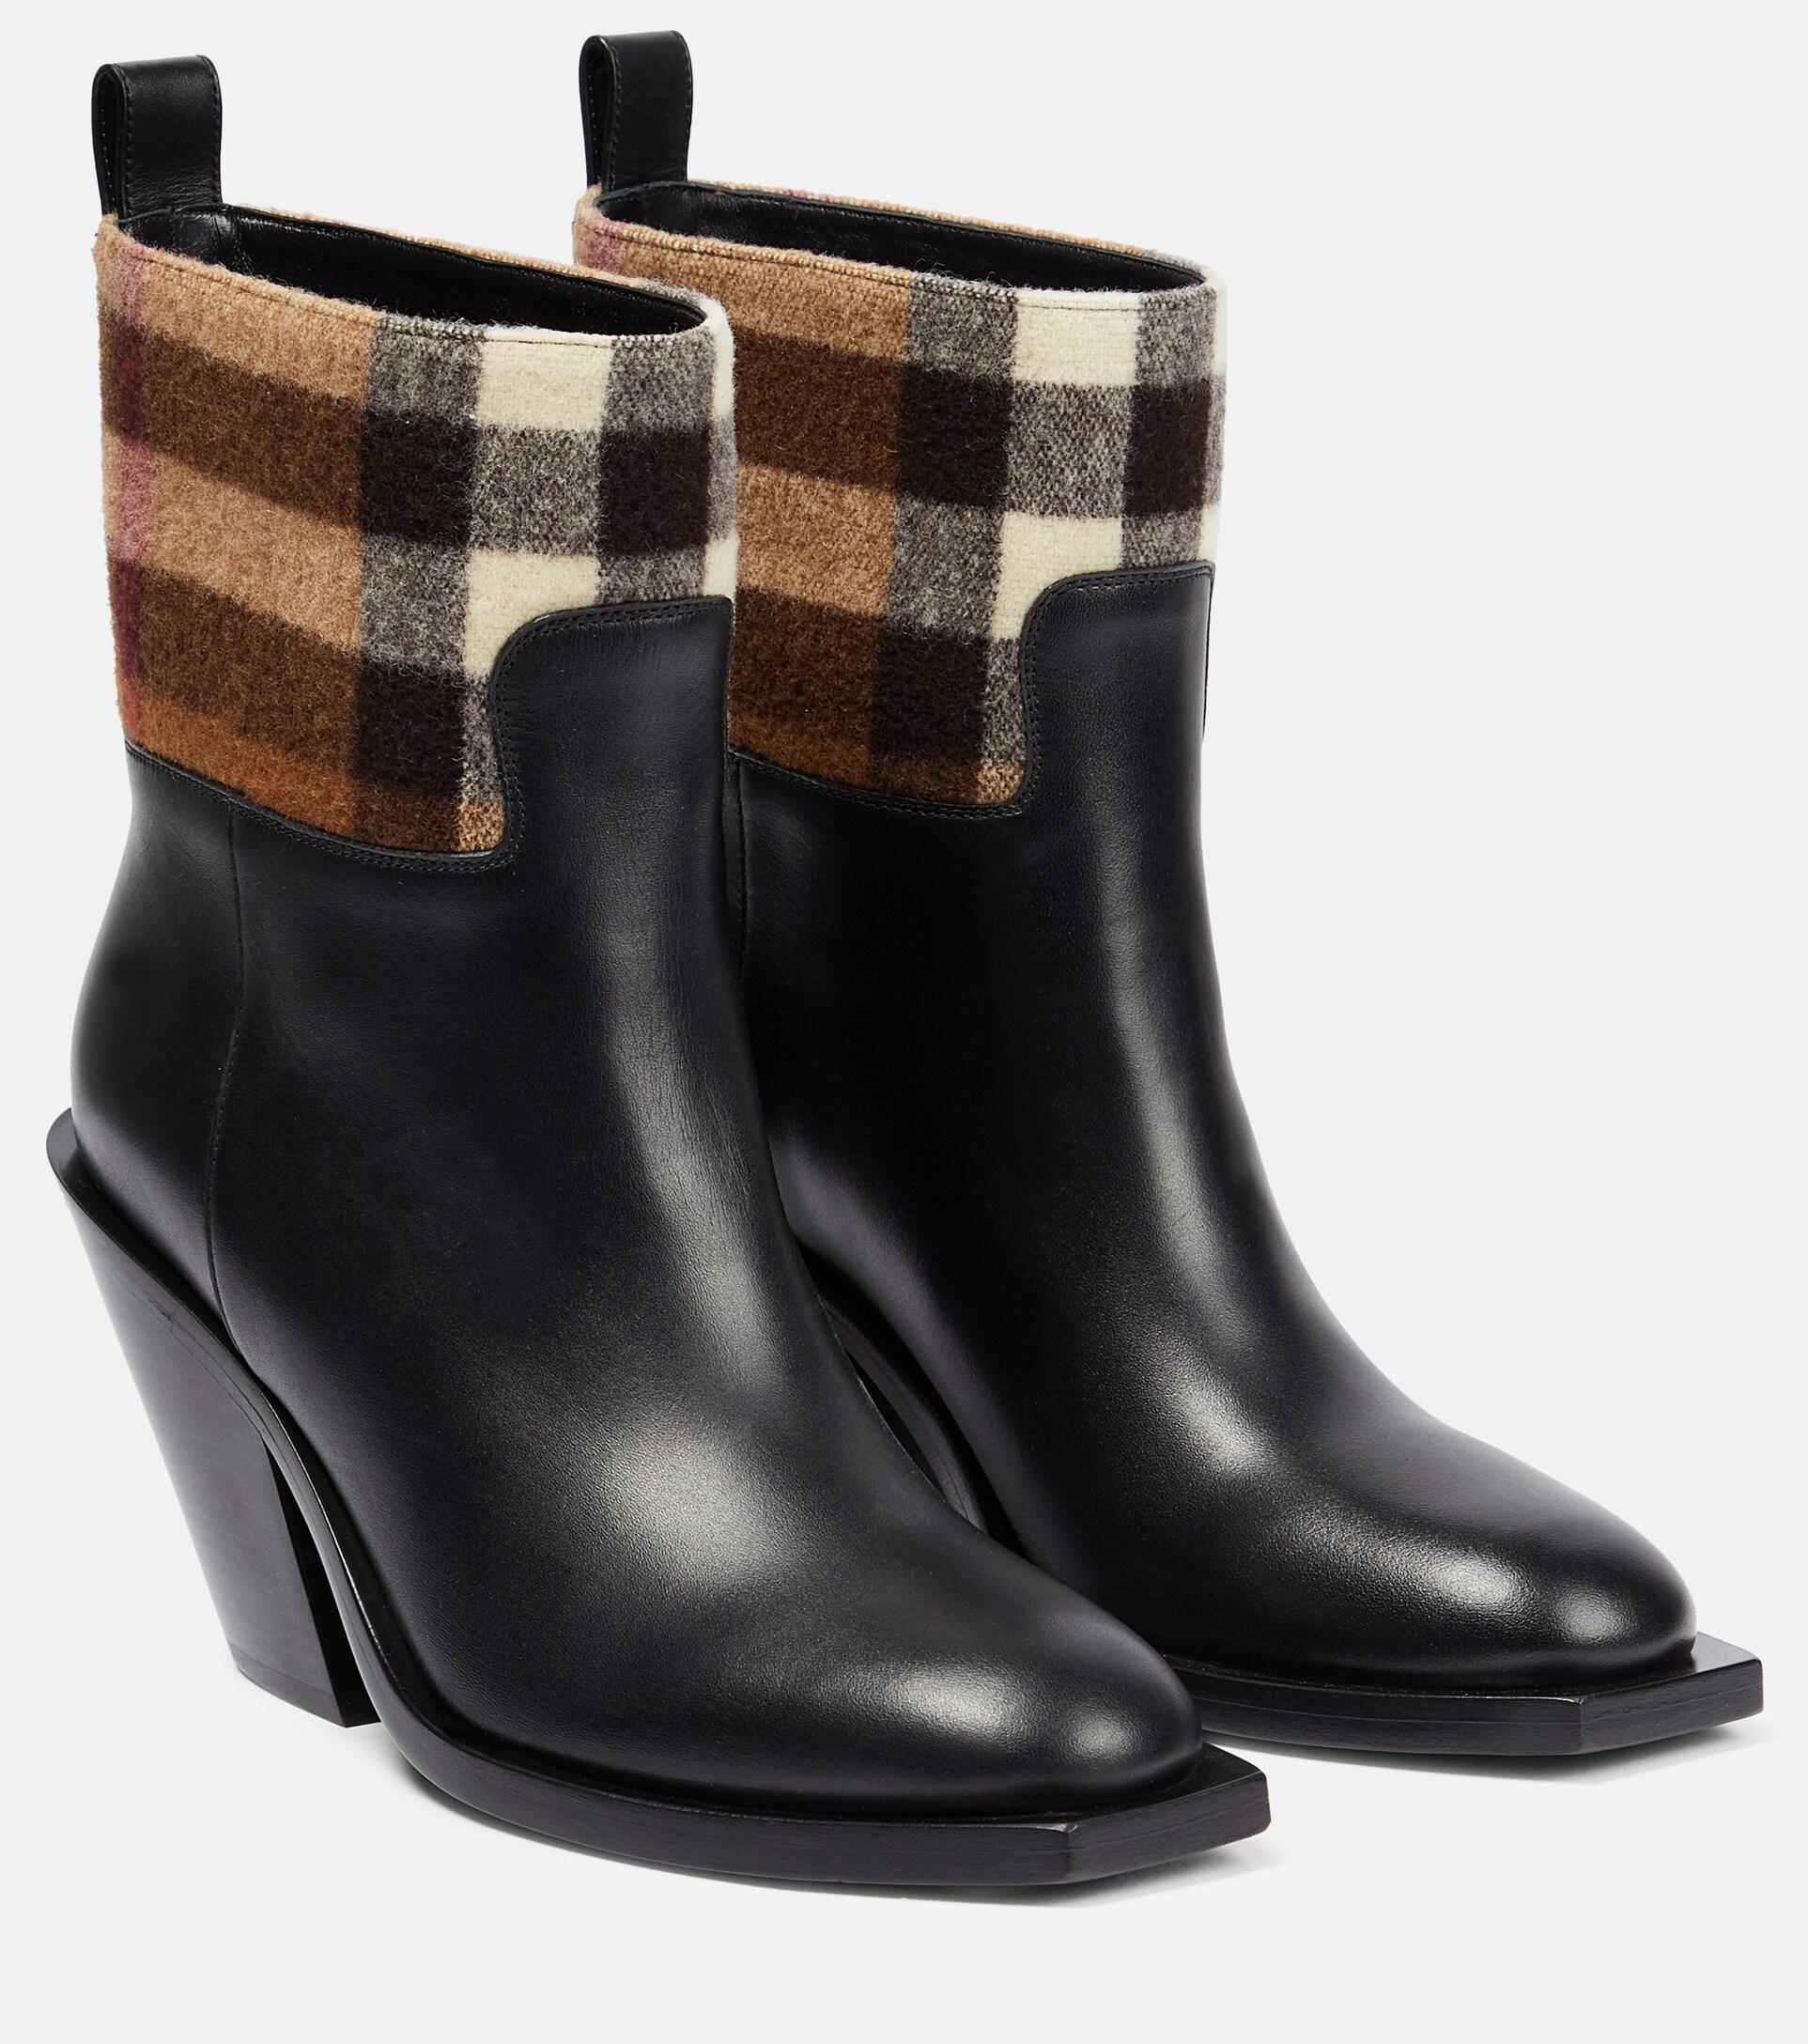 Retro Revival: Burberry Vintage Check Leather Ankle Boots